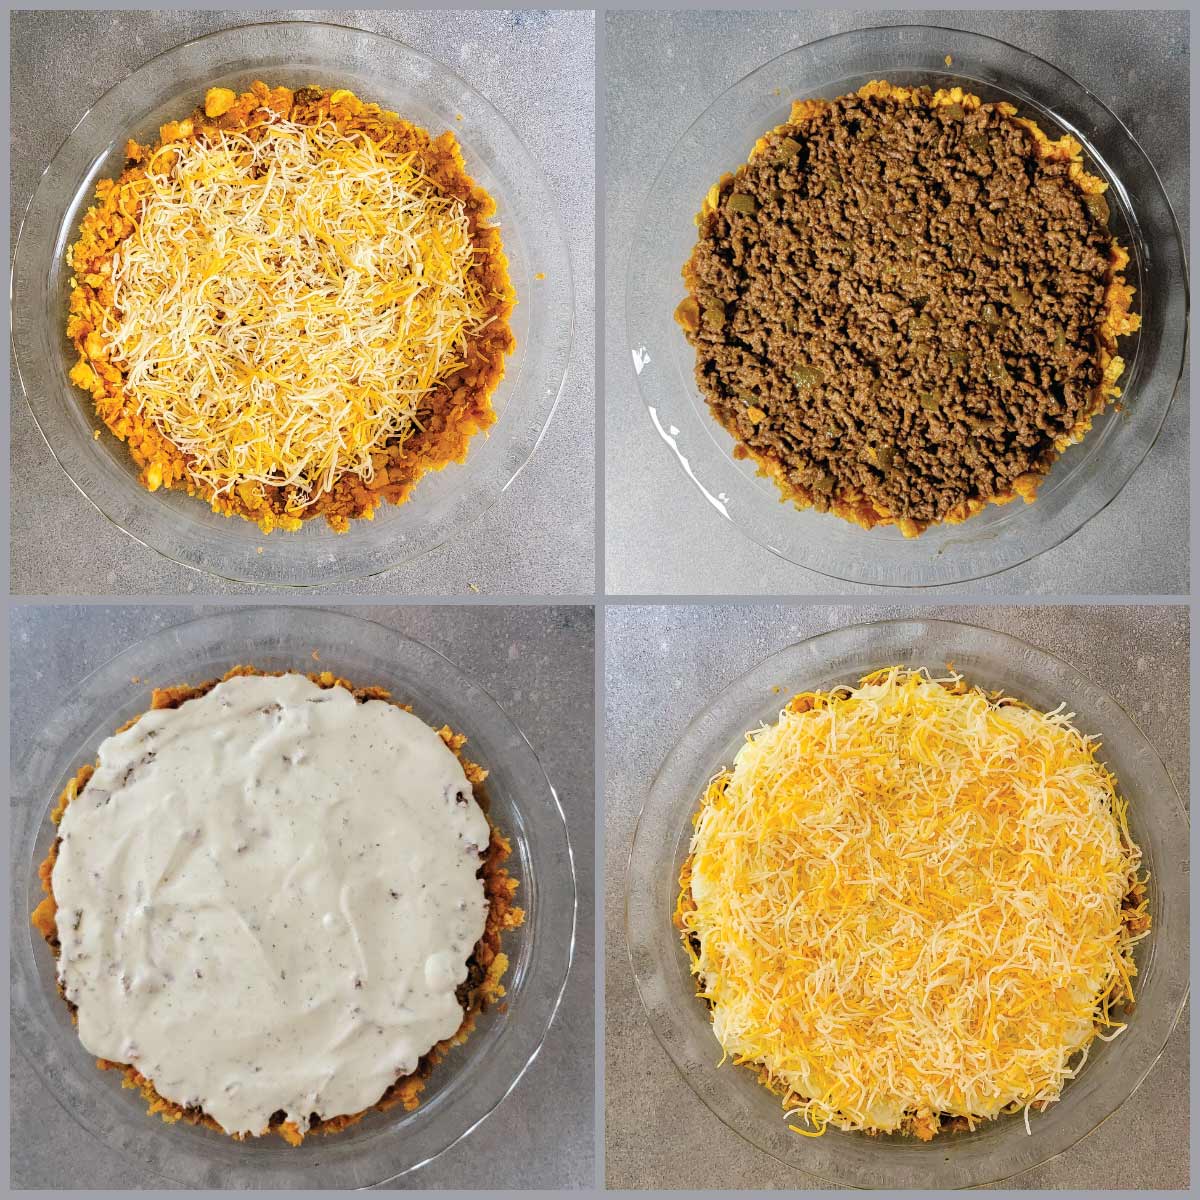 Steps for assembling the layers - adding the first layer of cheese, adding the meat, adding a layer of sour cream and topping with the cheese.